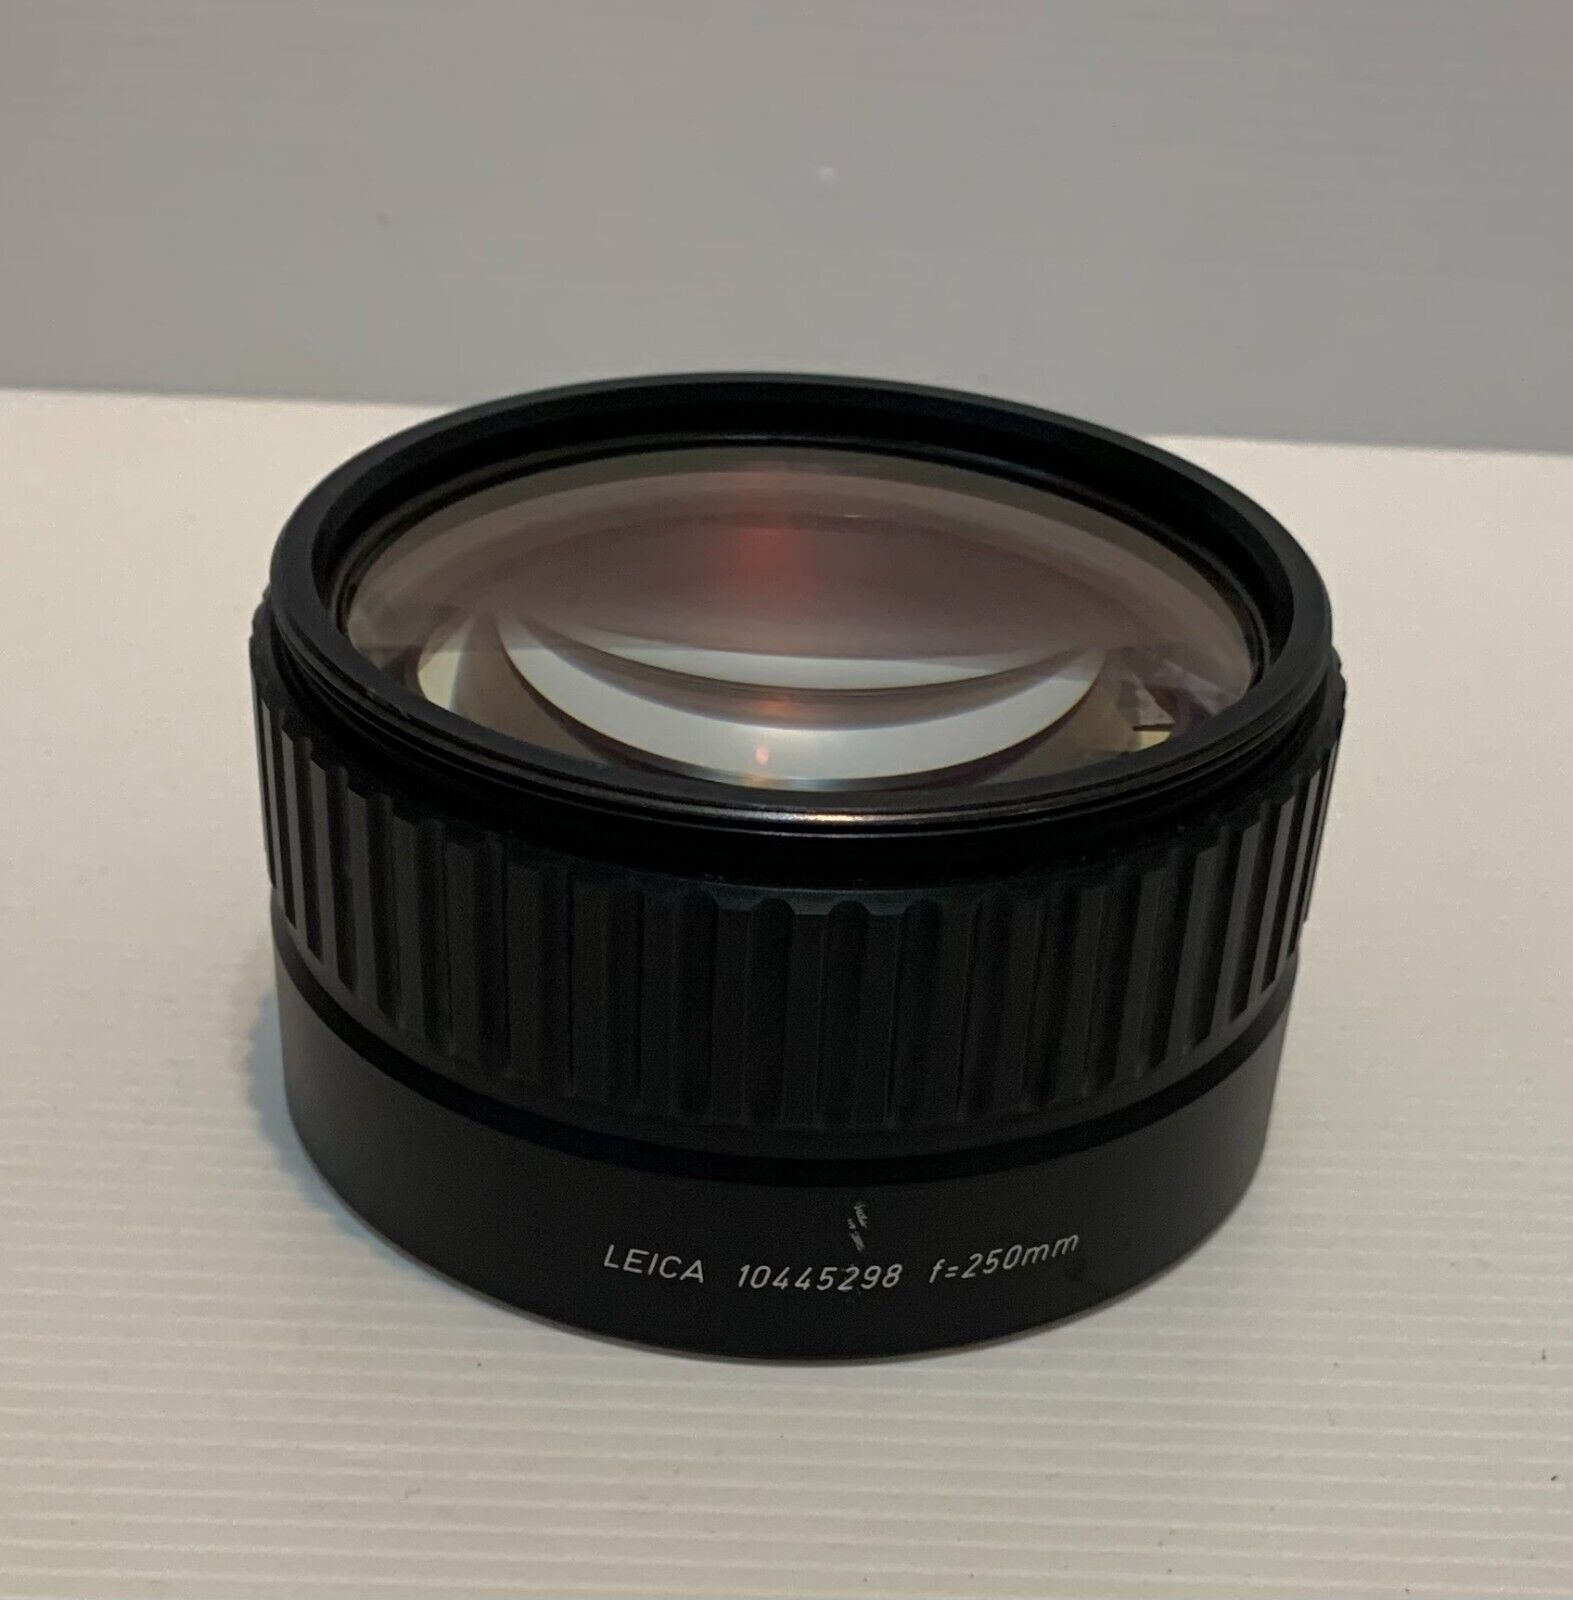 LEICA WILD 10445298 f= 250 MM OBJECTIVE LENS FOR THE M680 SURGICAL MICROSCOPE